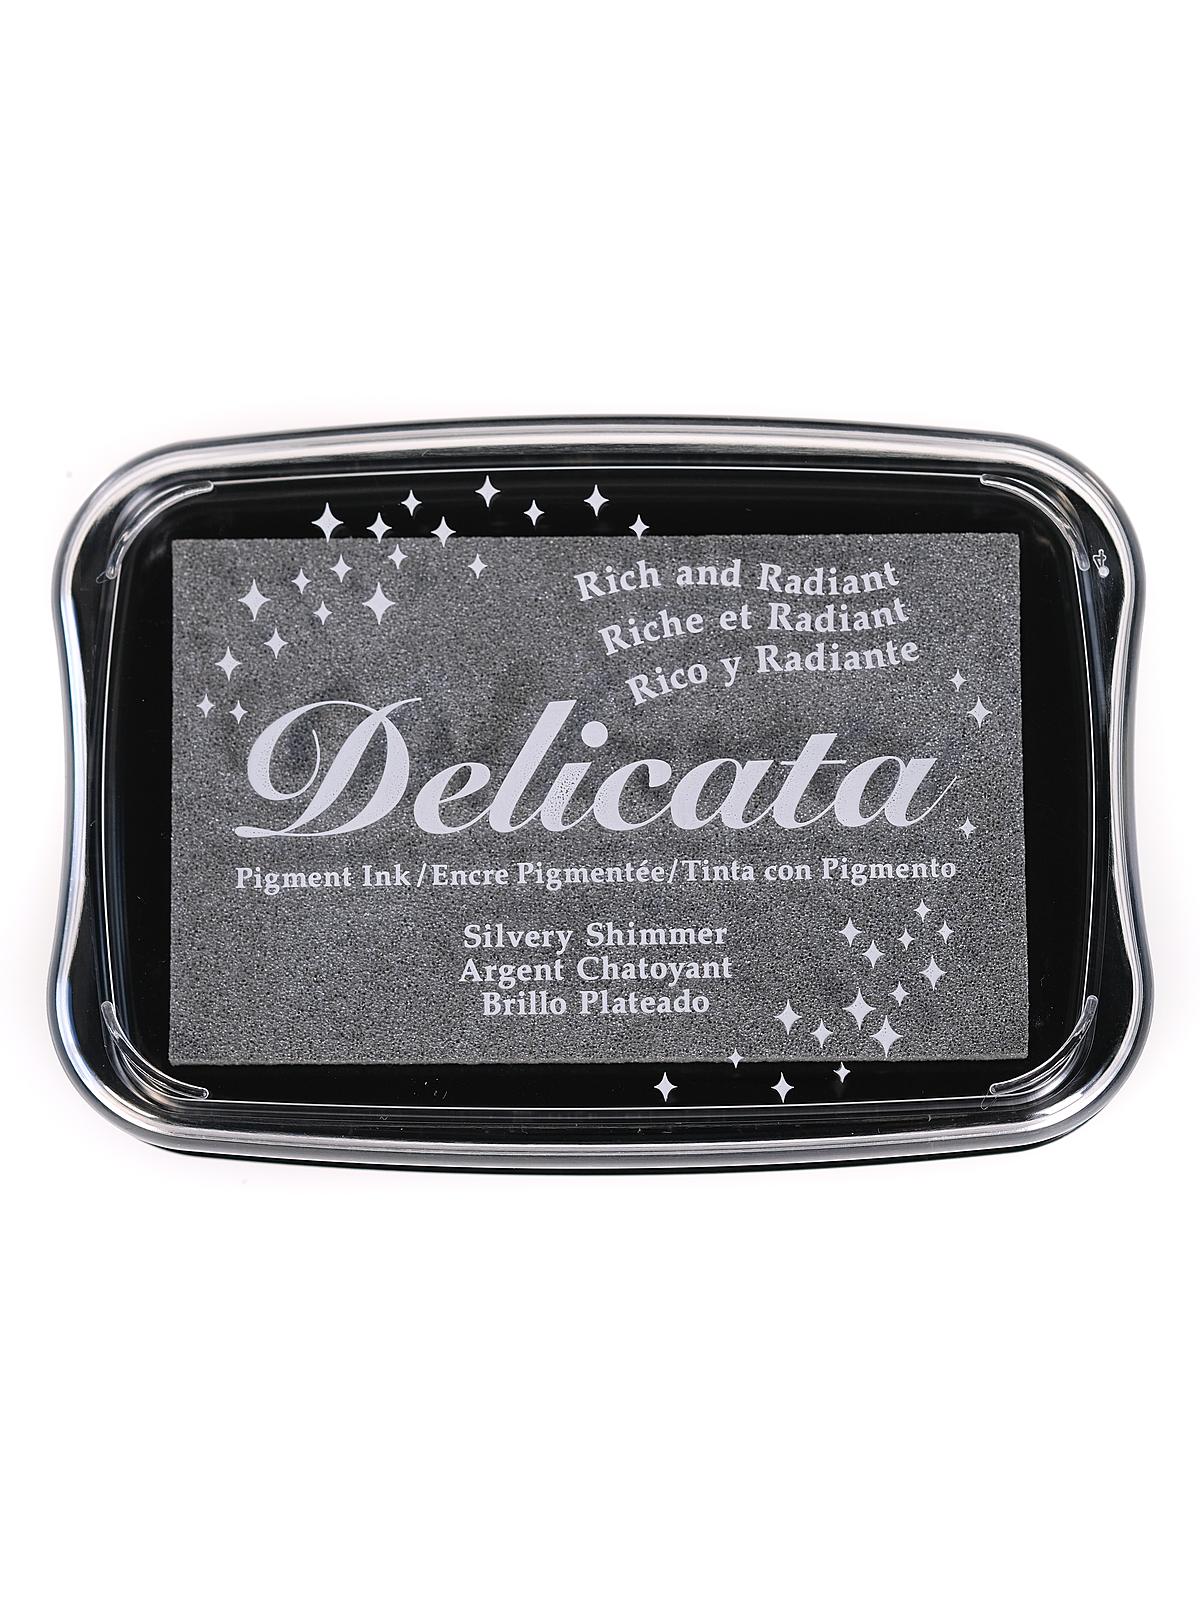 Delicata Pigment Ink 3.75 In. X 2.625 In. Full-size Pad Silvery Shimmer